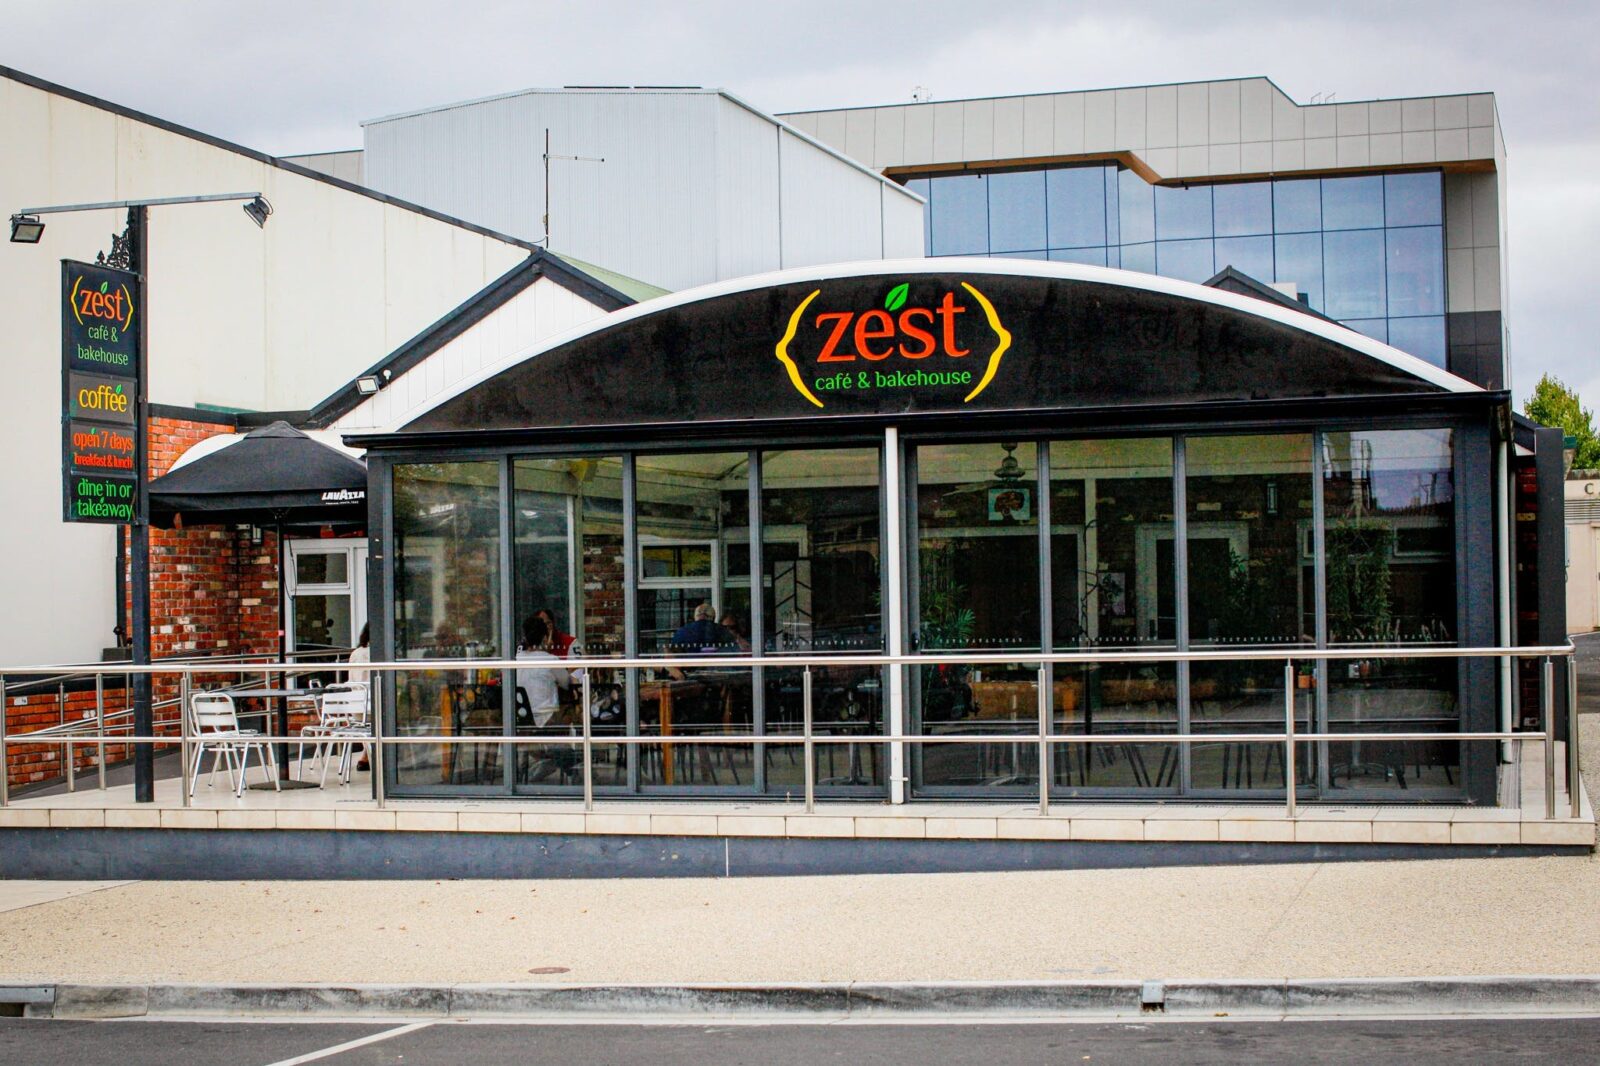 Zest Cafe and Bakehouse